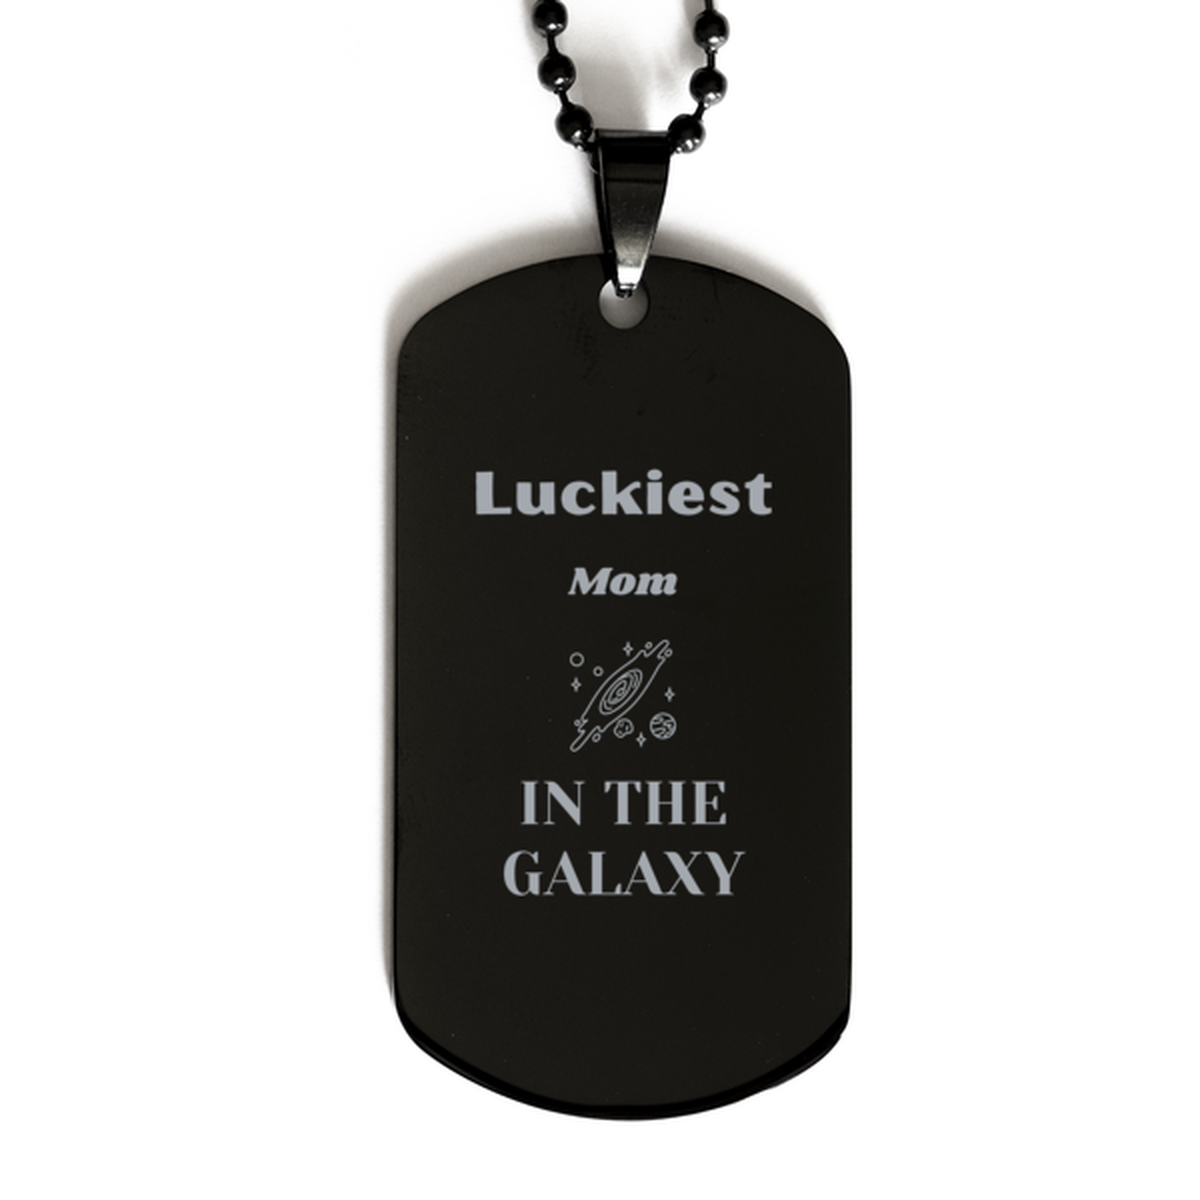 Luckiest Mom in the Galaxy, To My Mom Engraved Gifts, Christmas Mom Black Dog Tag Gifts, X-mas Birthday Unique Gifts For Mom Men Women